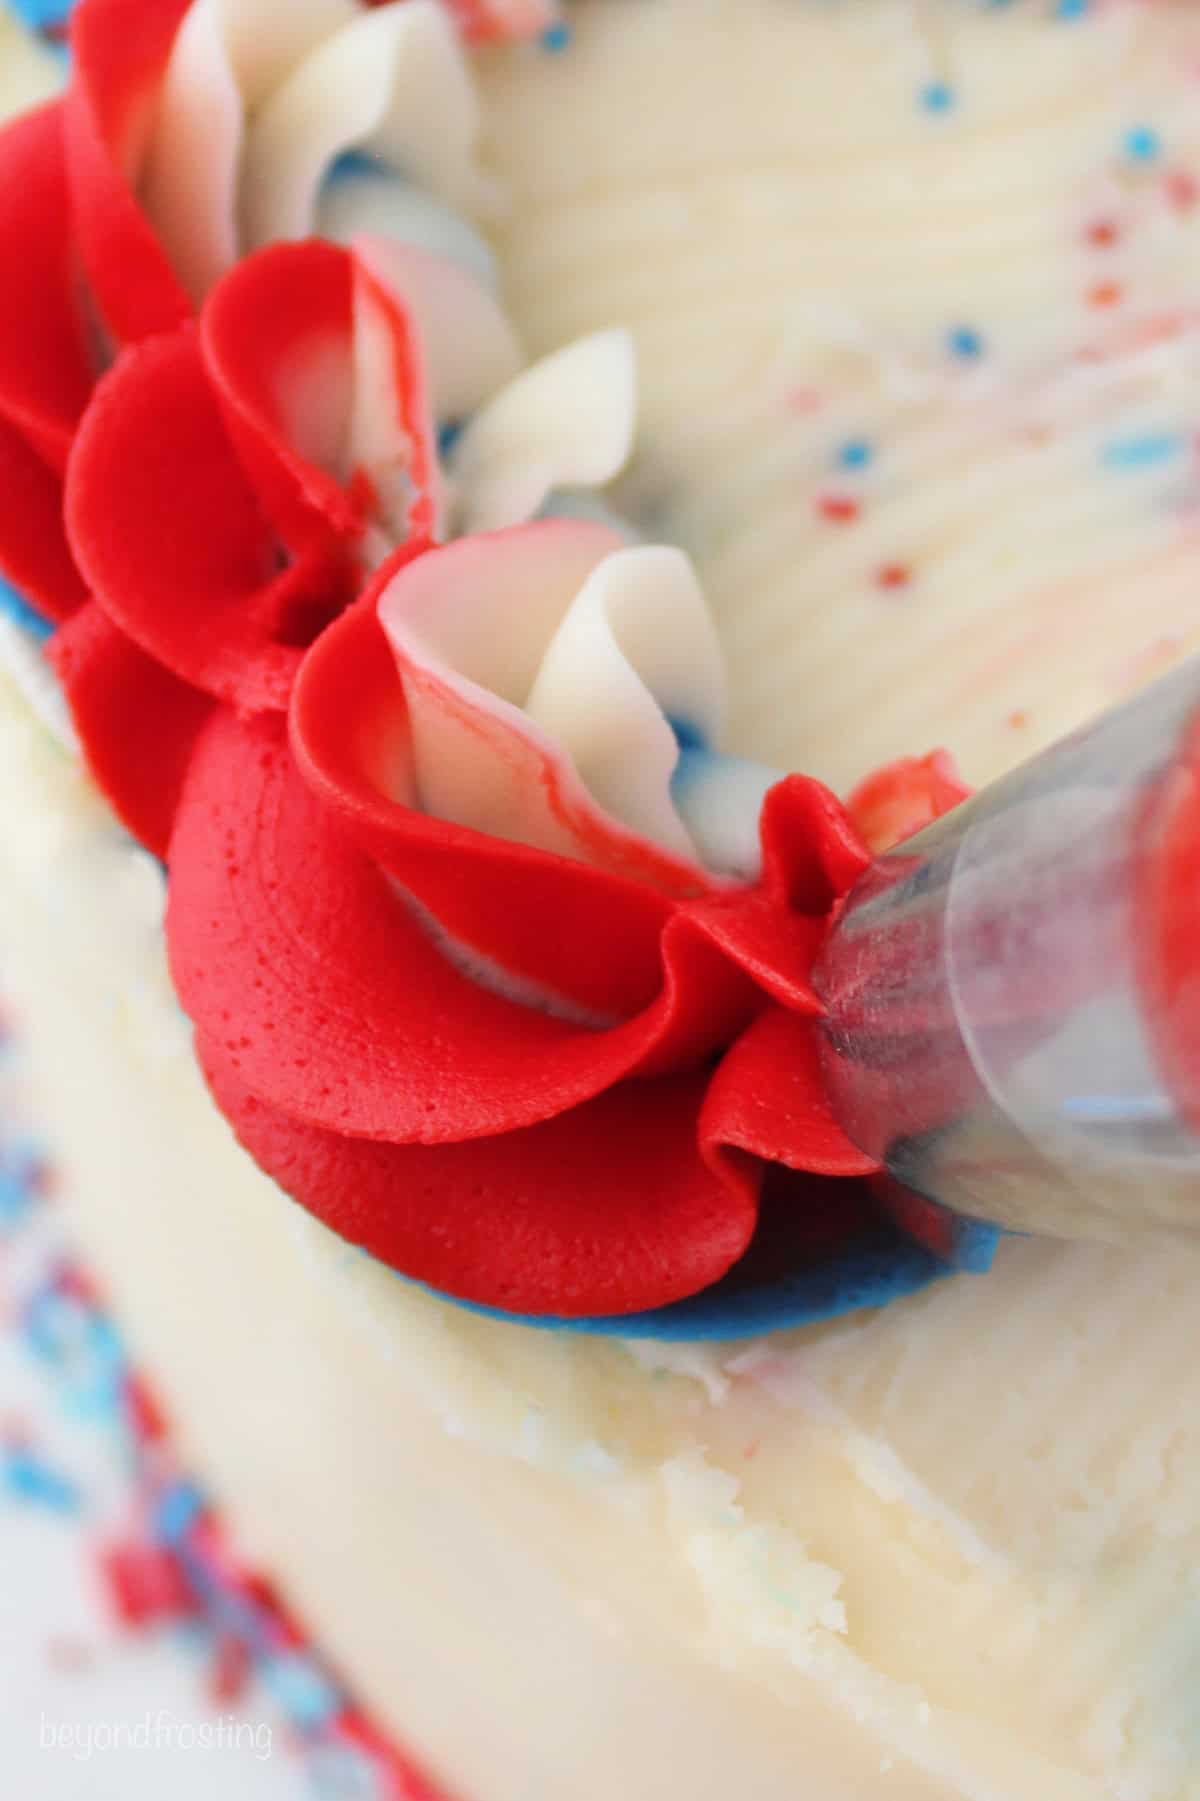 Close up of a piping tip piping a decoration of mutlicolored red, white, and blue frosting onto a cake.